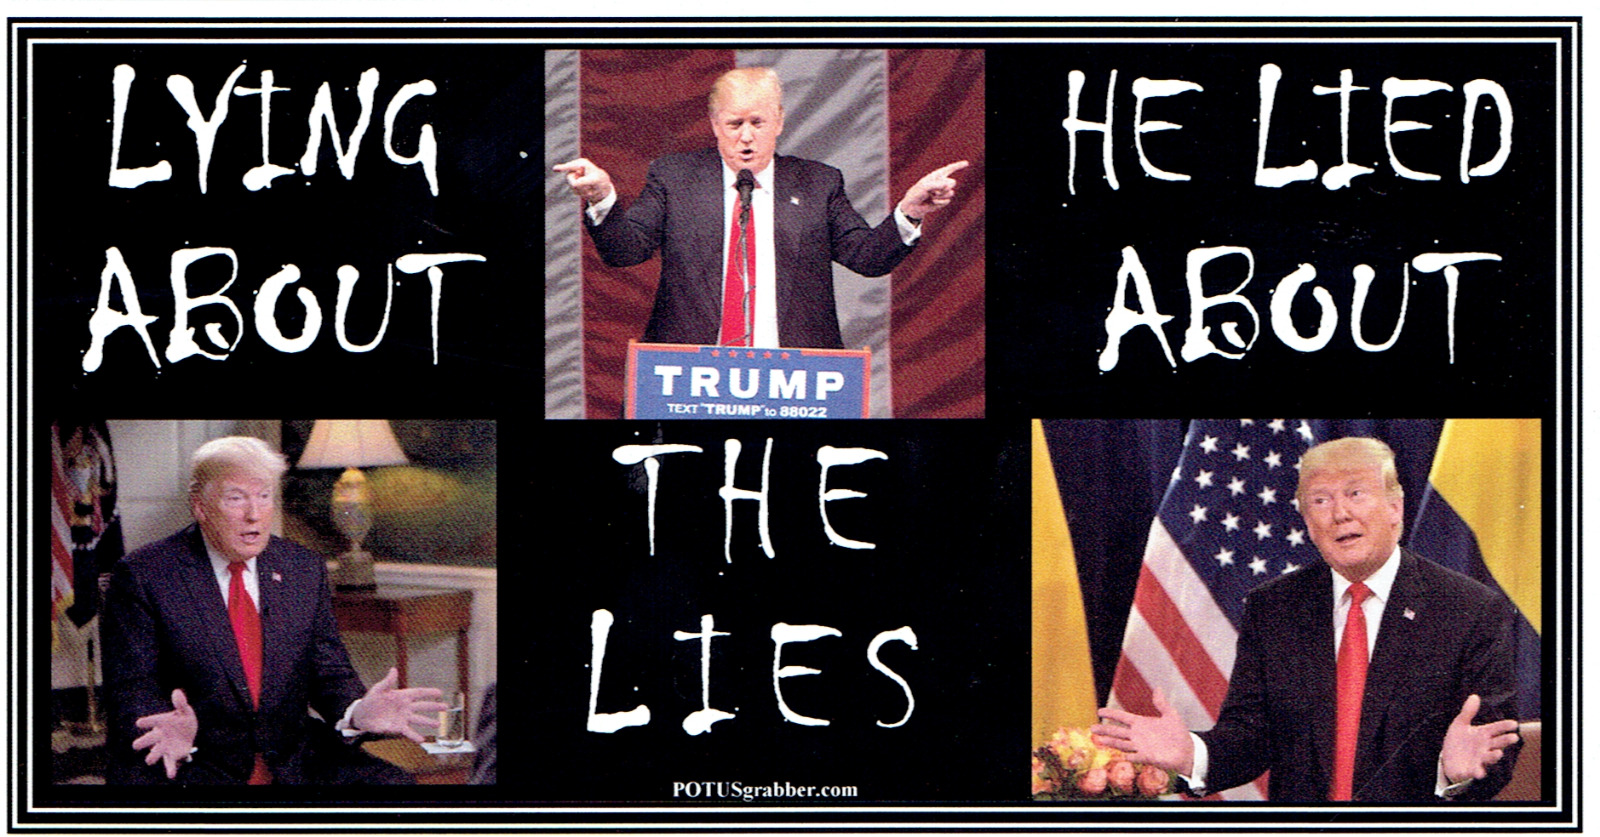 ANTI Trump: LYING ABOUT THE LIES HE LIED ABOUT   DURABLE bumper sticker